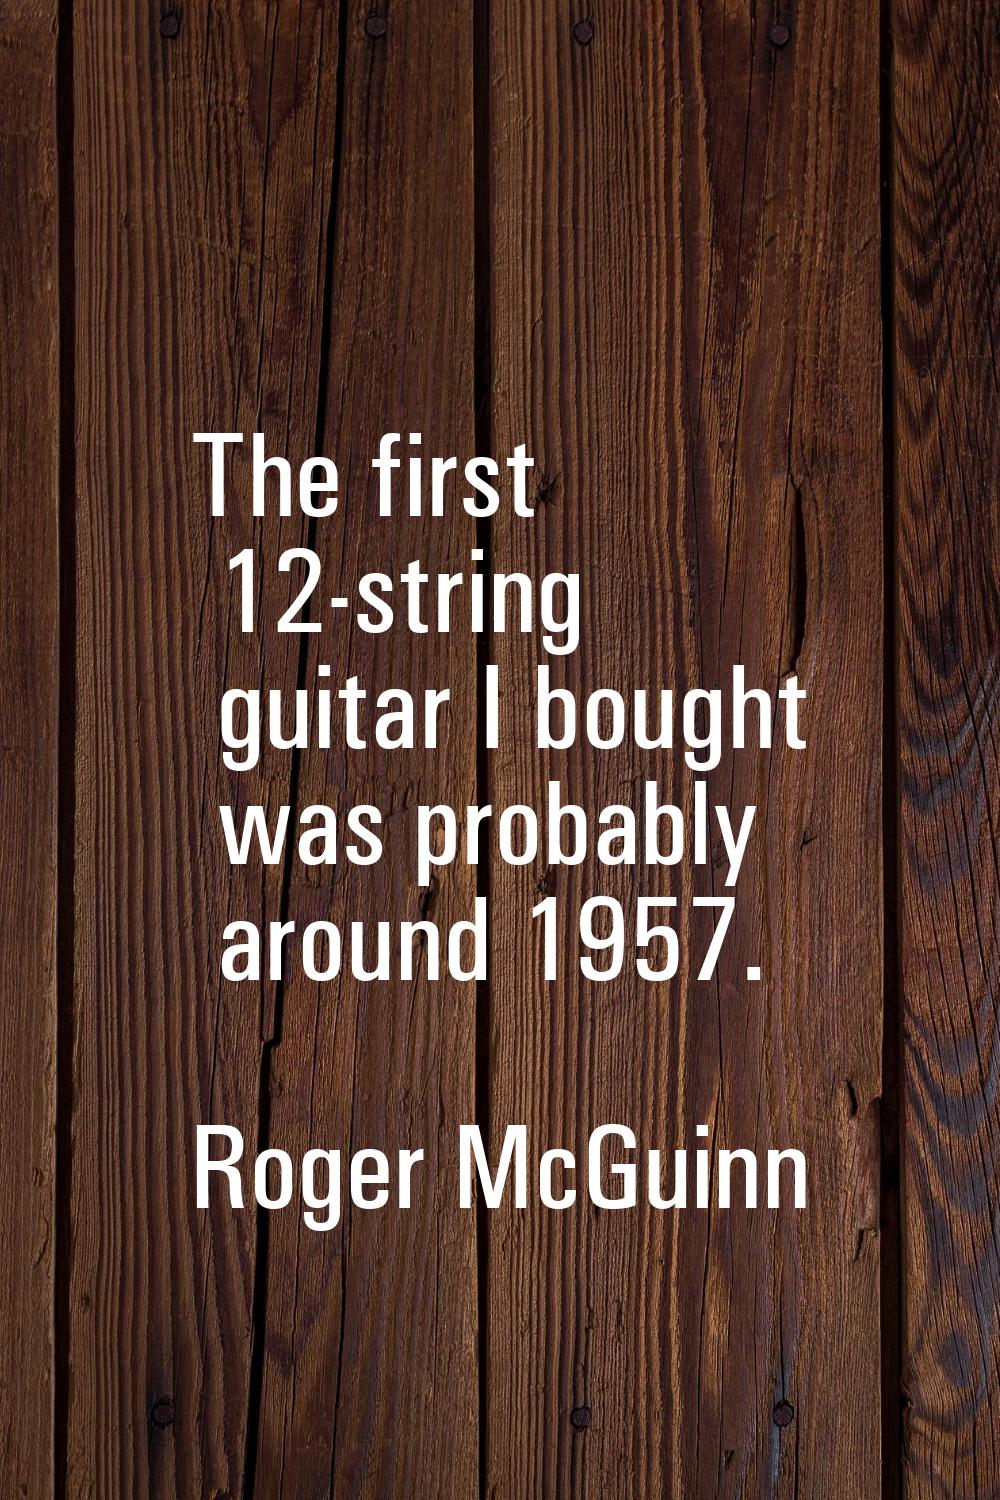 The first 12-string guitar I bought was probably around 1957.